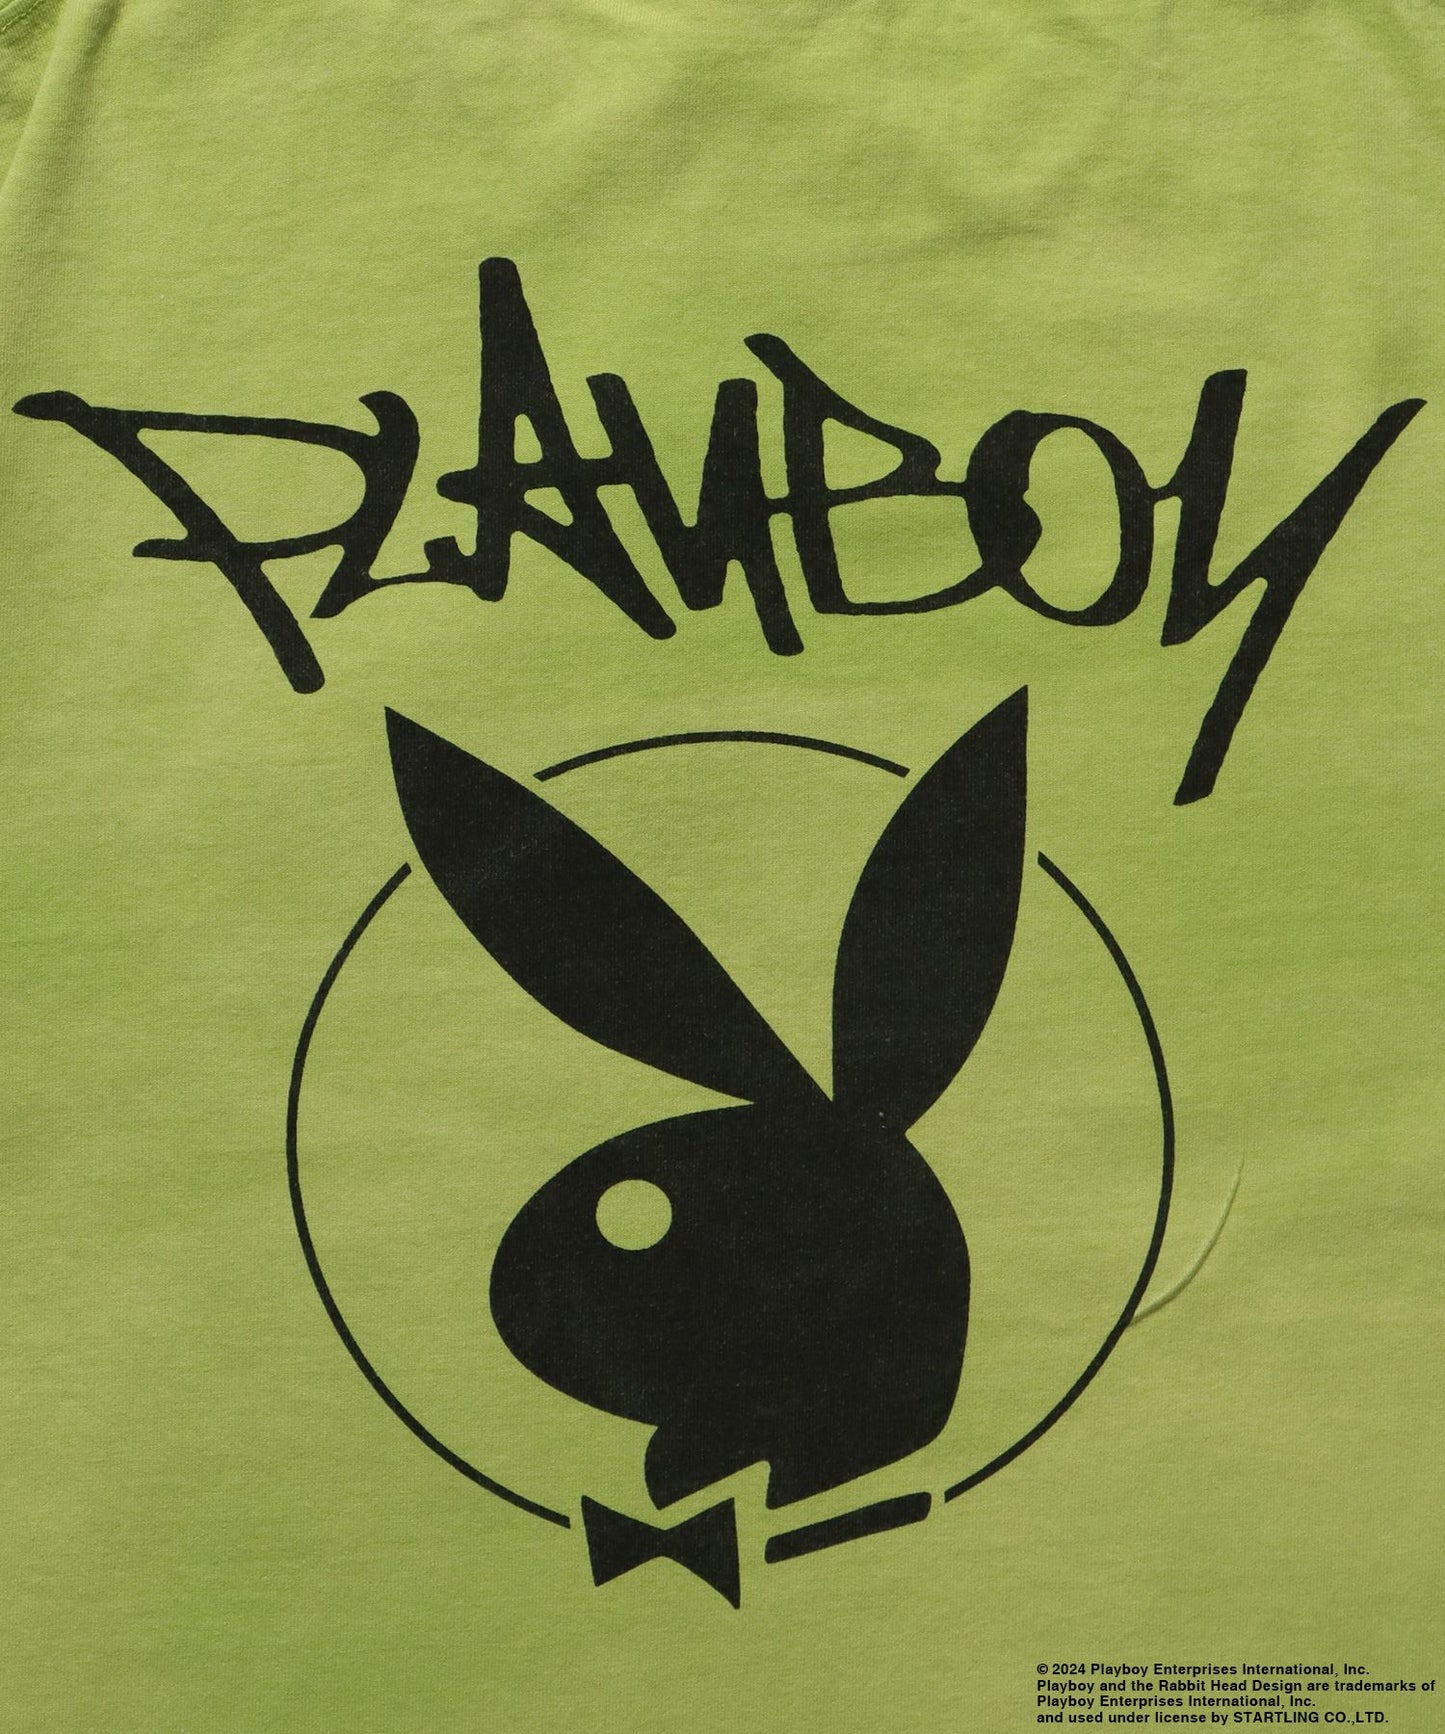 PB O.G LOGO FADE S/S TEE / PLAYBOY×Sequenz フェード加工 90s ヴィンテージ Tシャツ グラフィティ プリント 半袖 グリーン